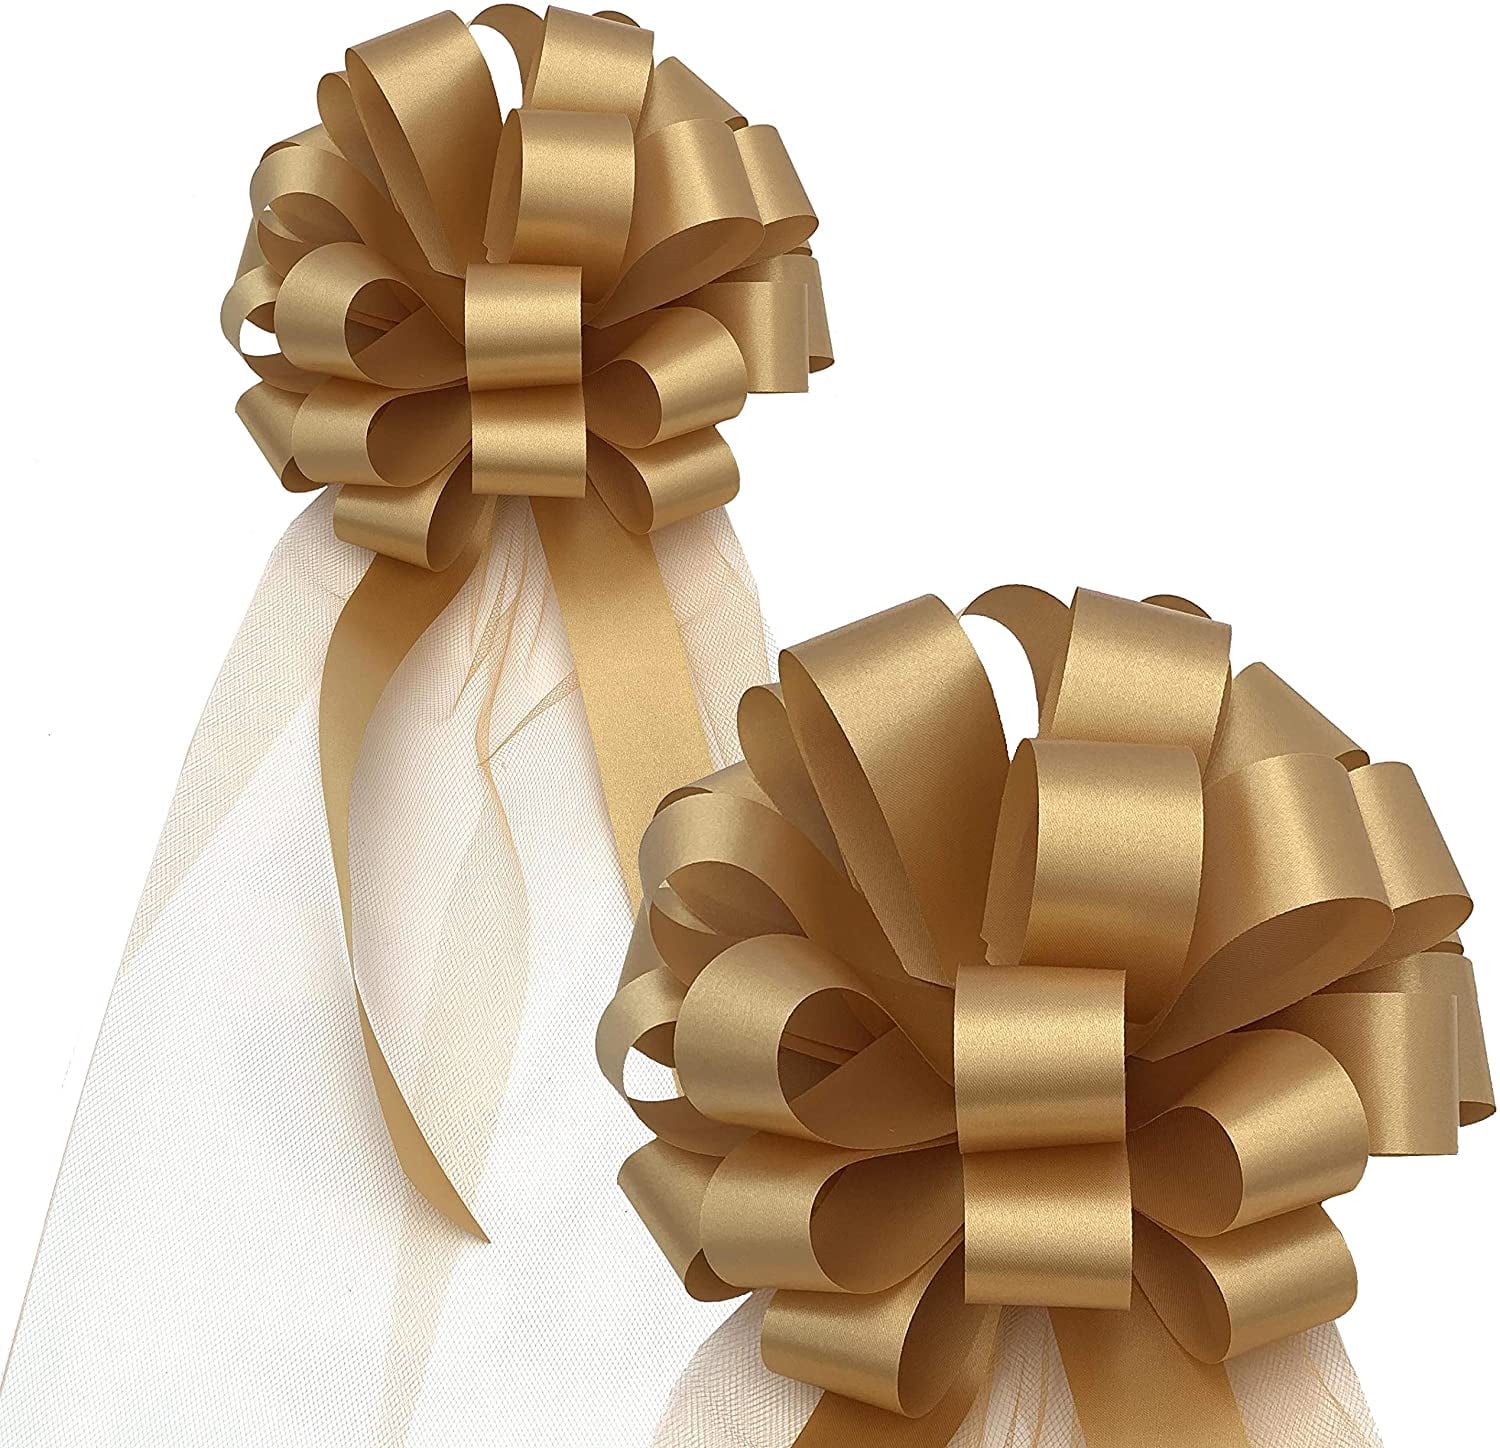 Large 10 White Wedding Pew Bows - Wired Satin Organza Ribbon, 18 Long  with Tails, Set of 6, Aisle Decorations, Christmas, Reception, Bridal  Shower